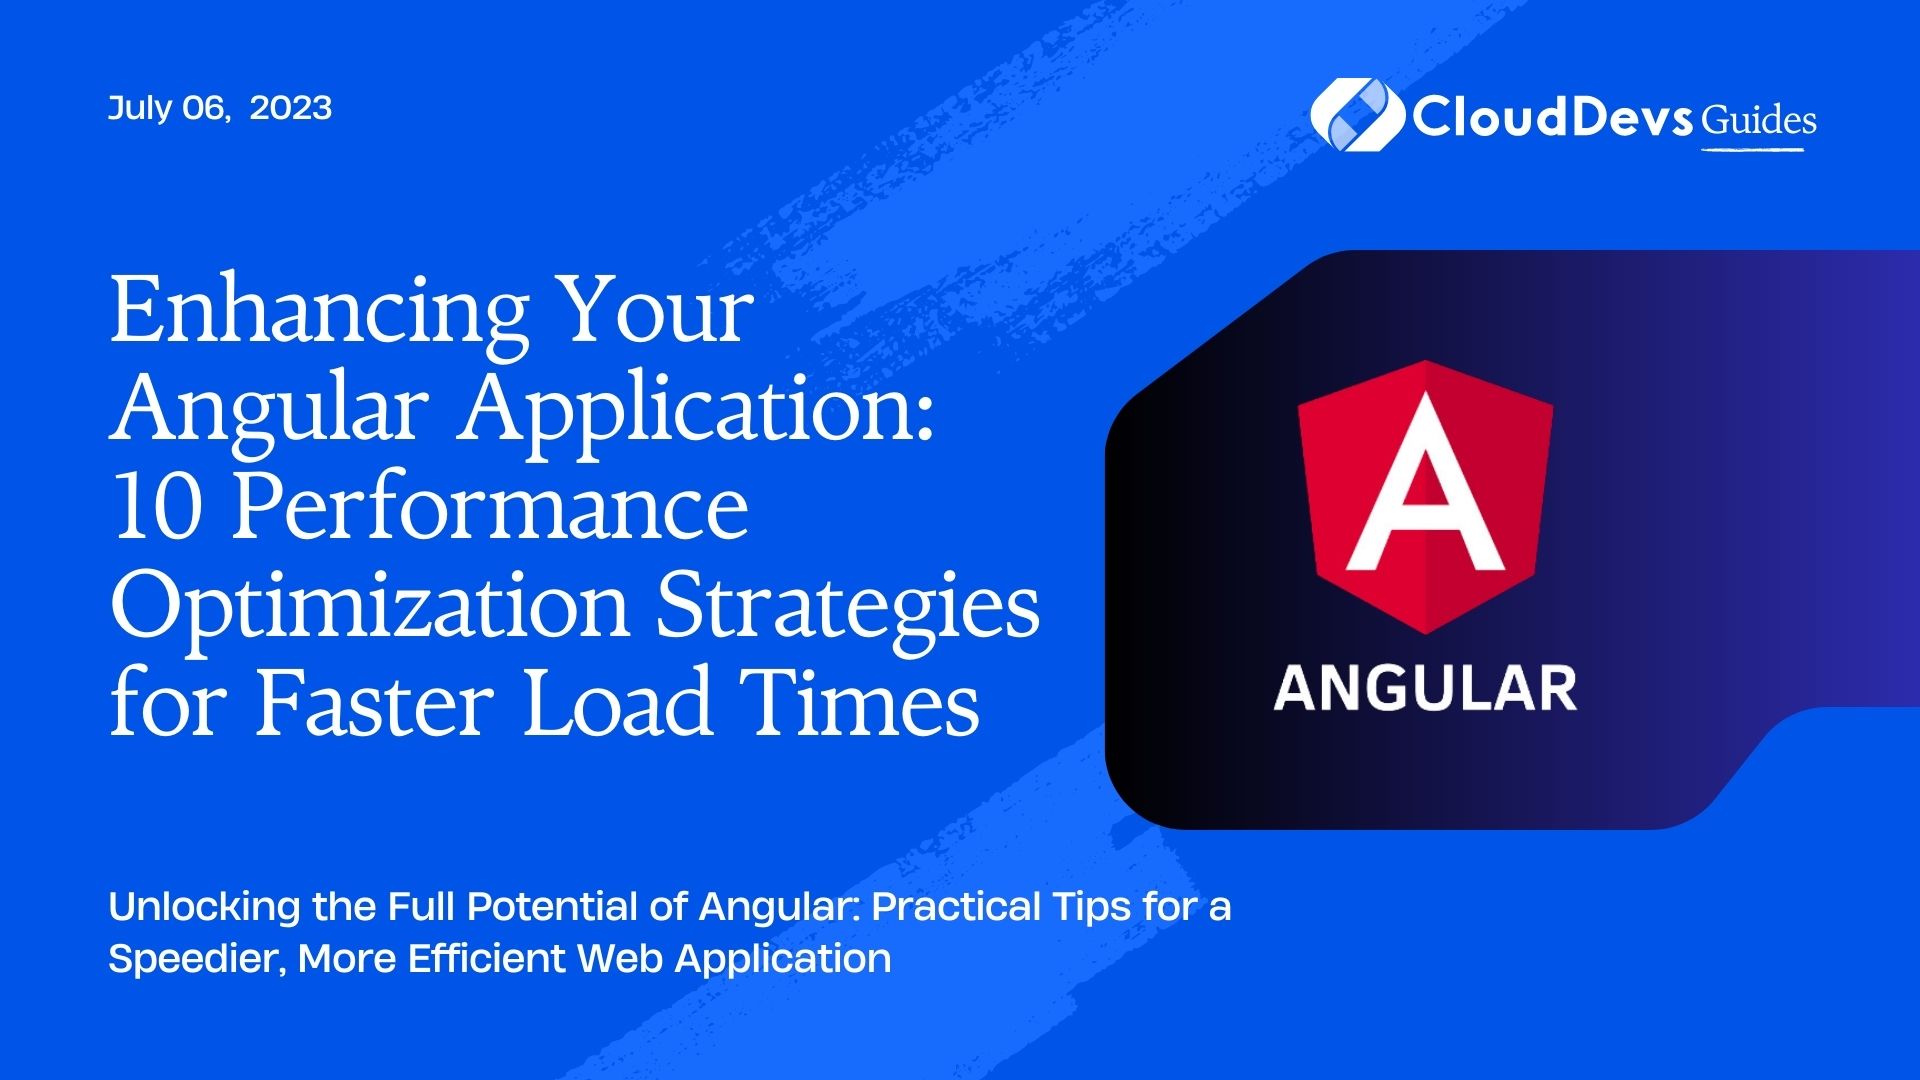 Enhancing Your Angular Application: 10 Performance Optimization Strategies for Faster Load Times